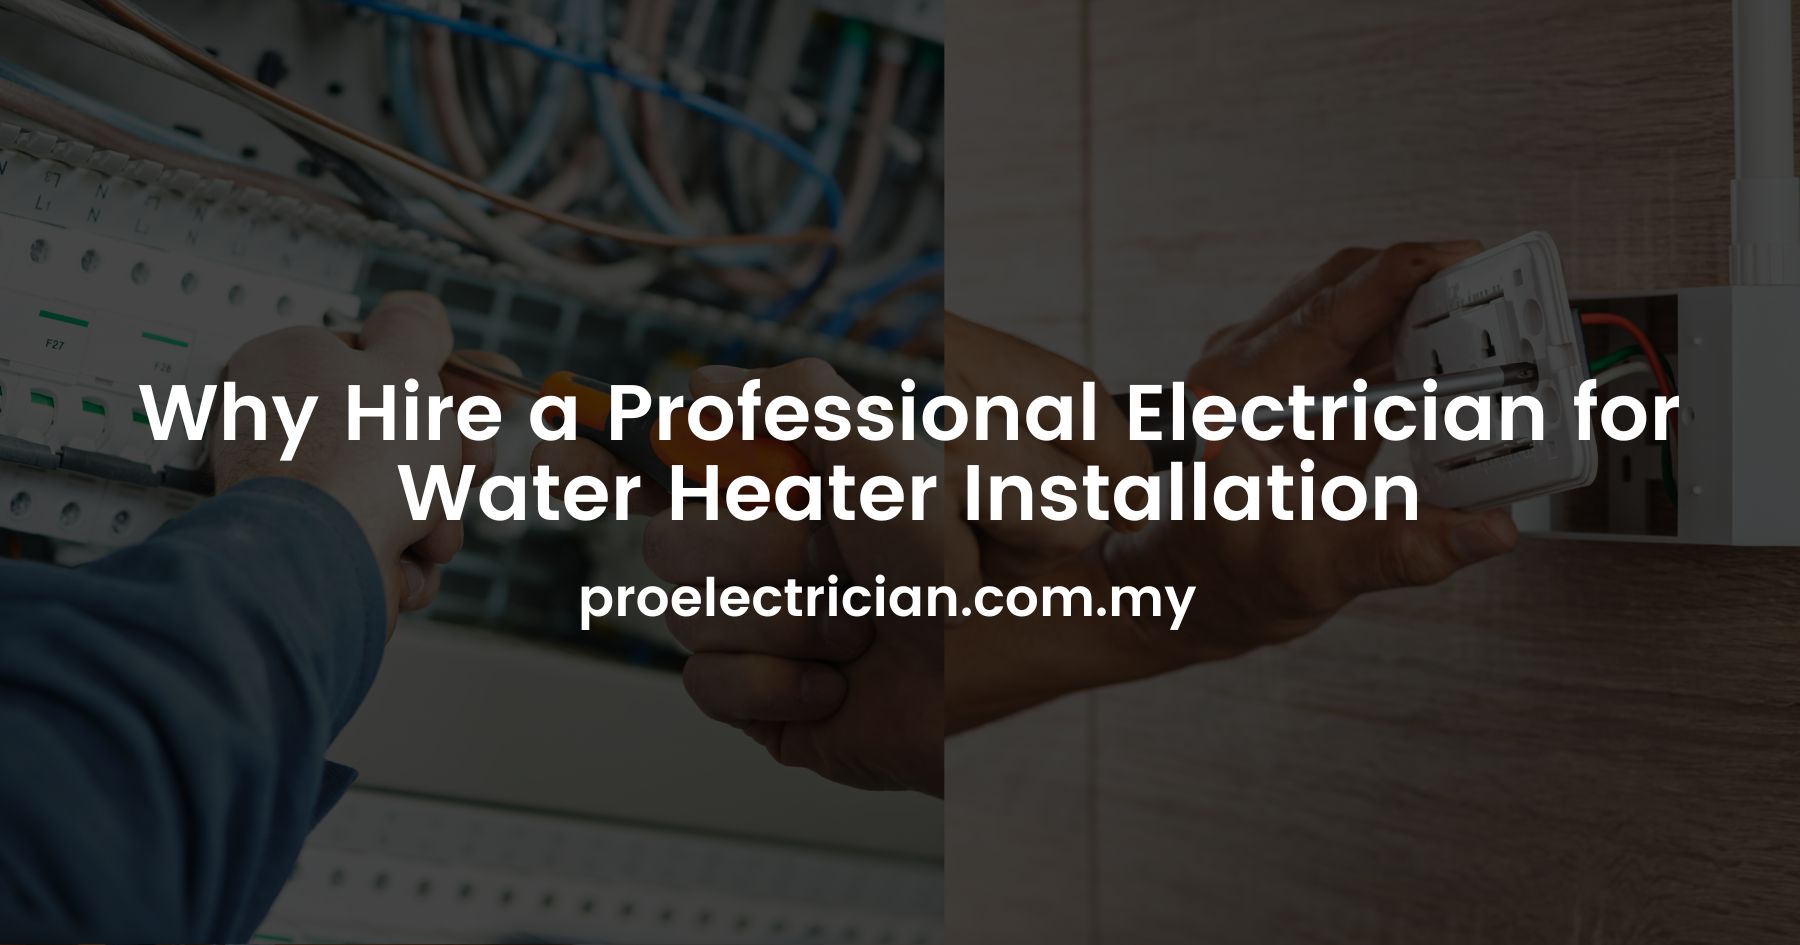 Why Hire a Professional Electrician for Water Heater Installation